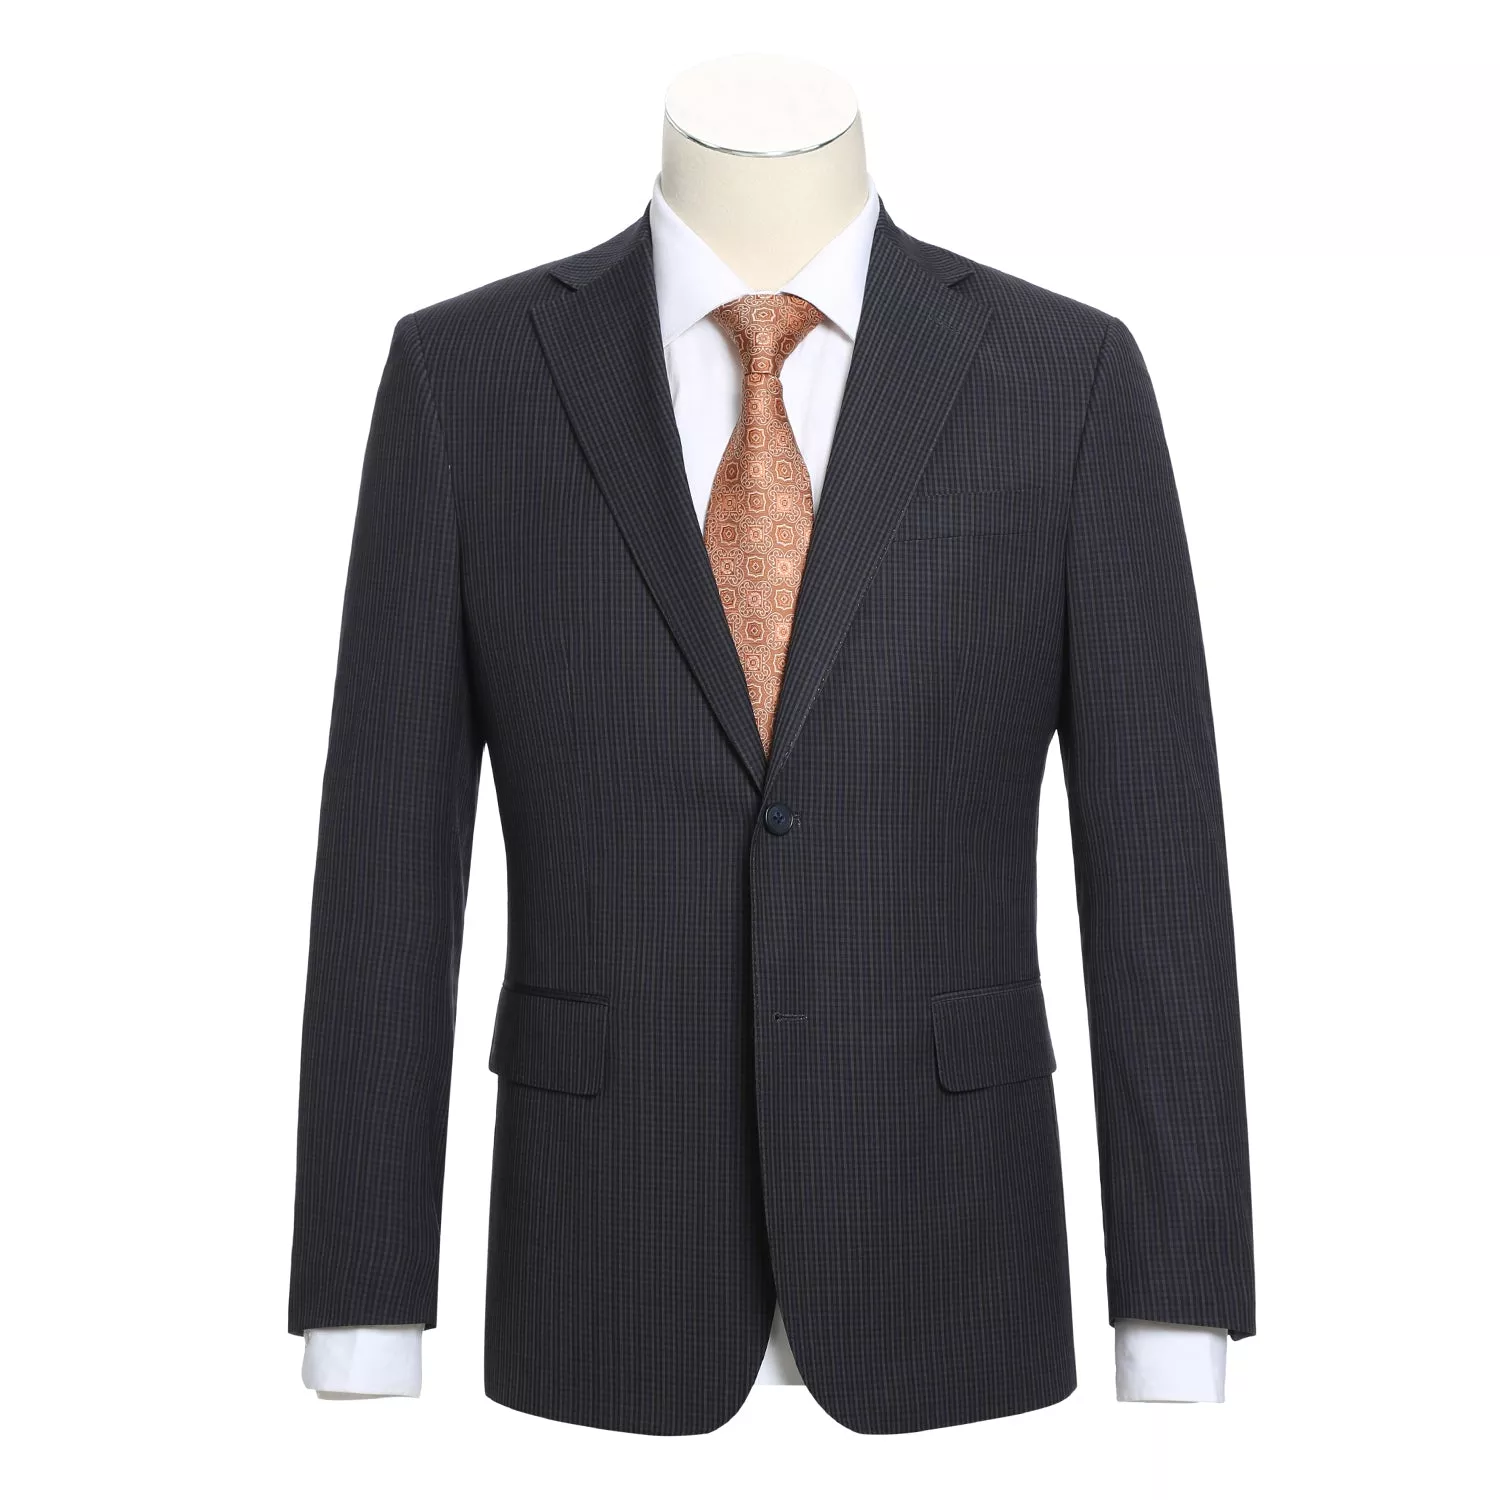 English Laundry Gray Blue Micro Check Suit